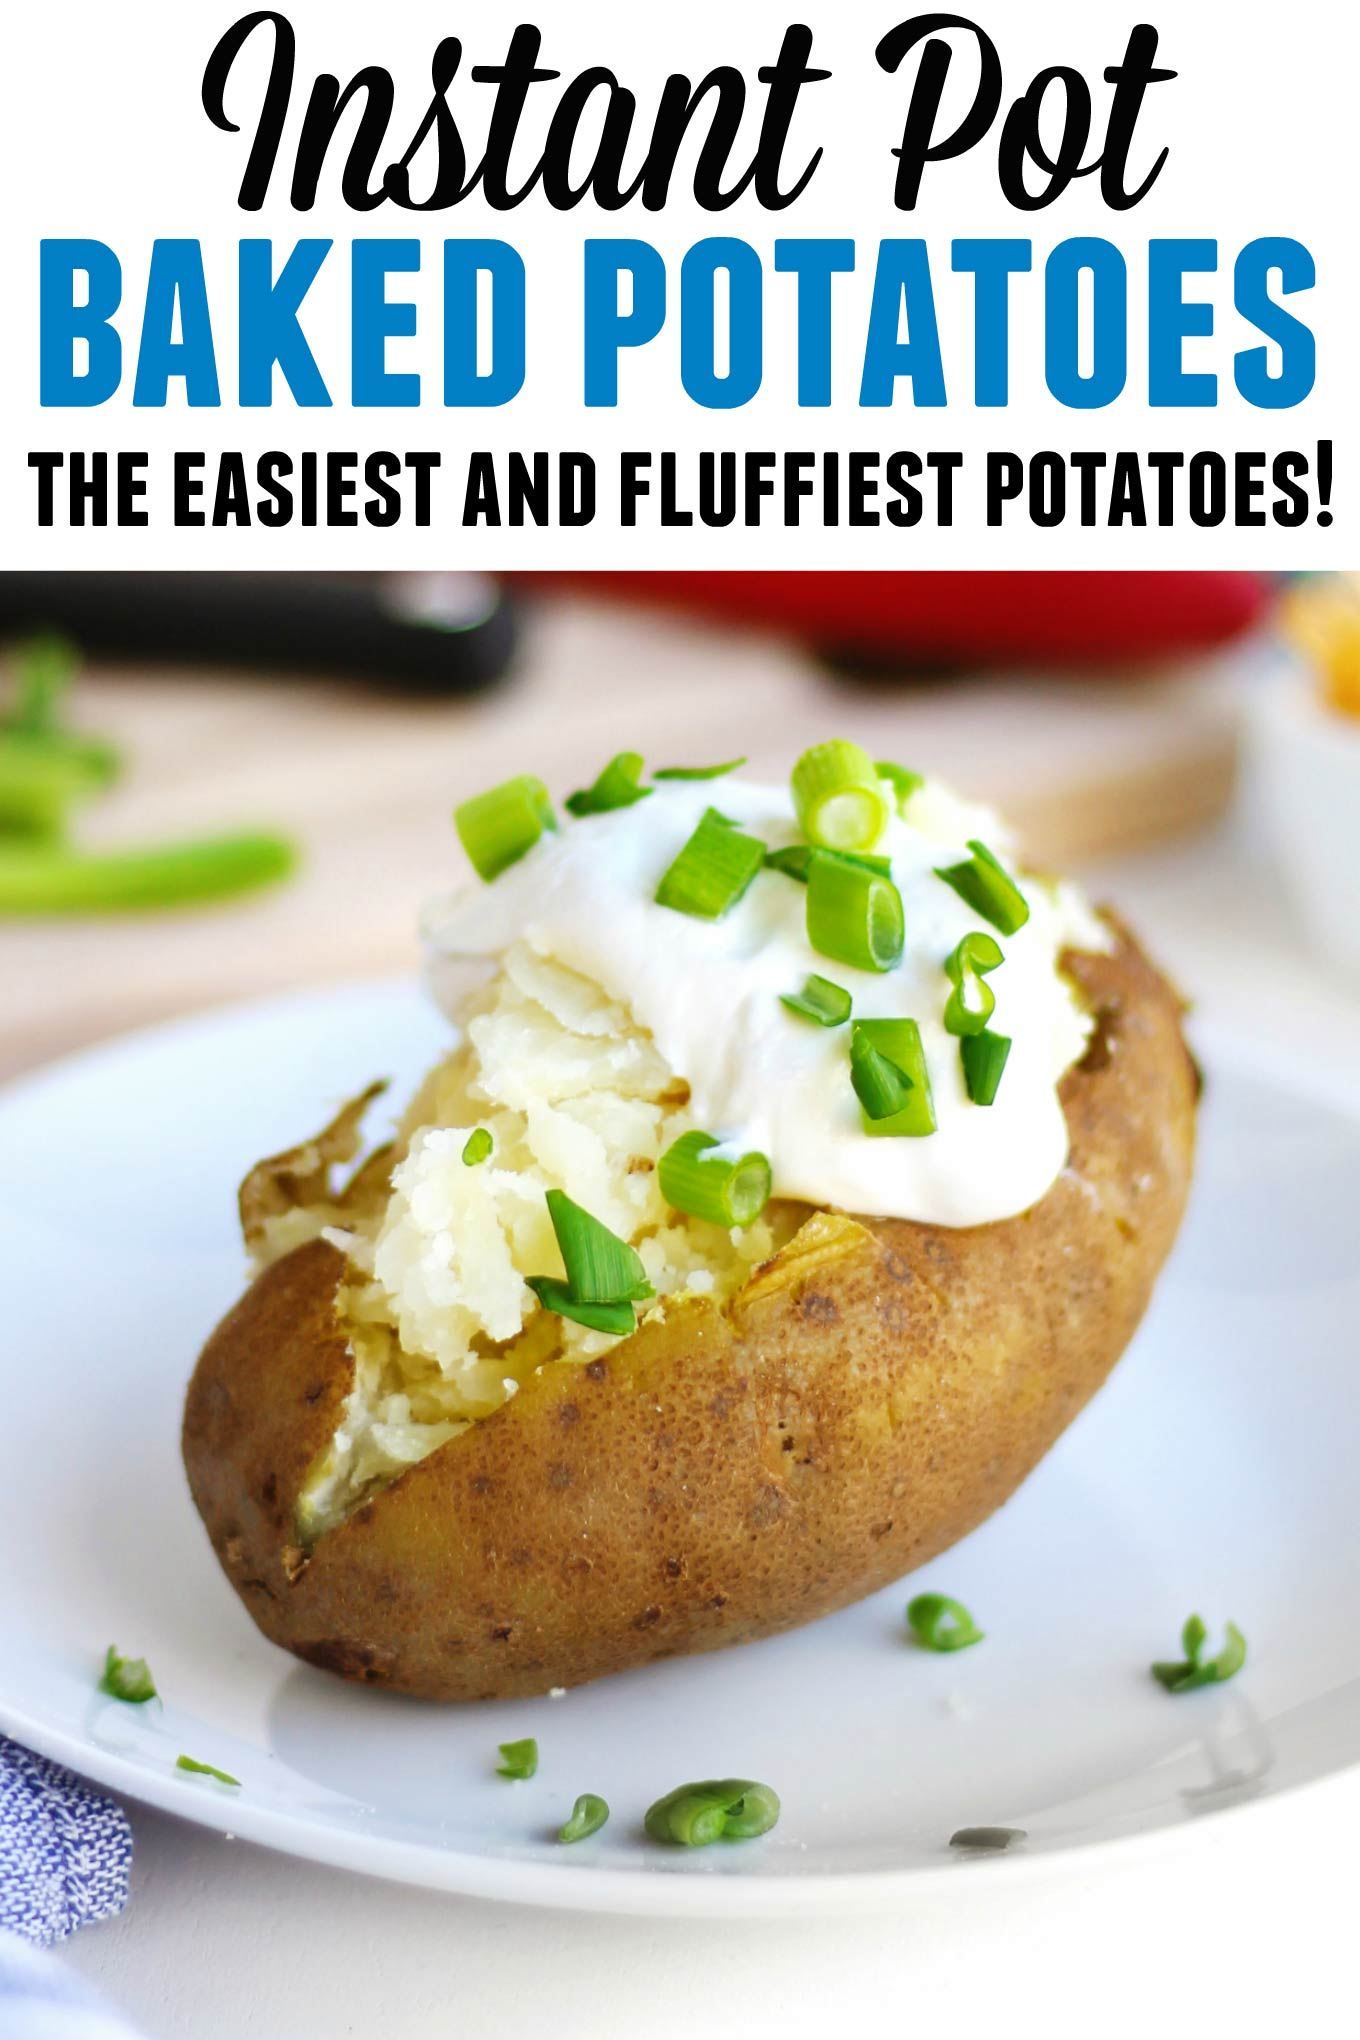 baked potato cooking instructions